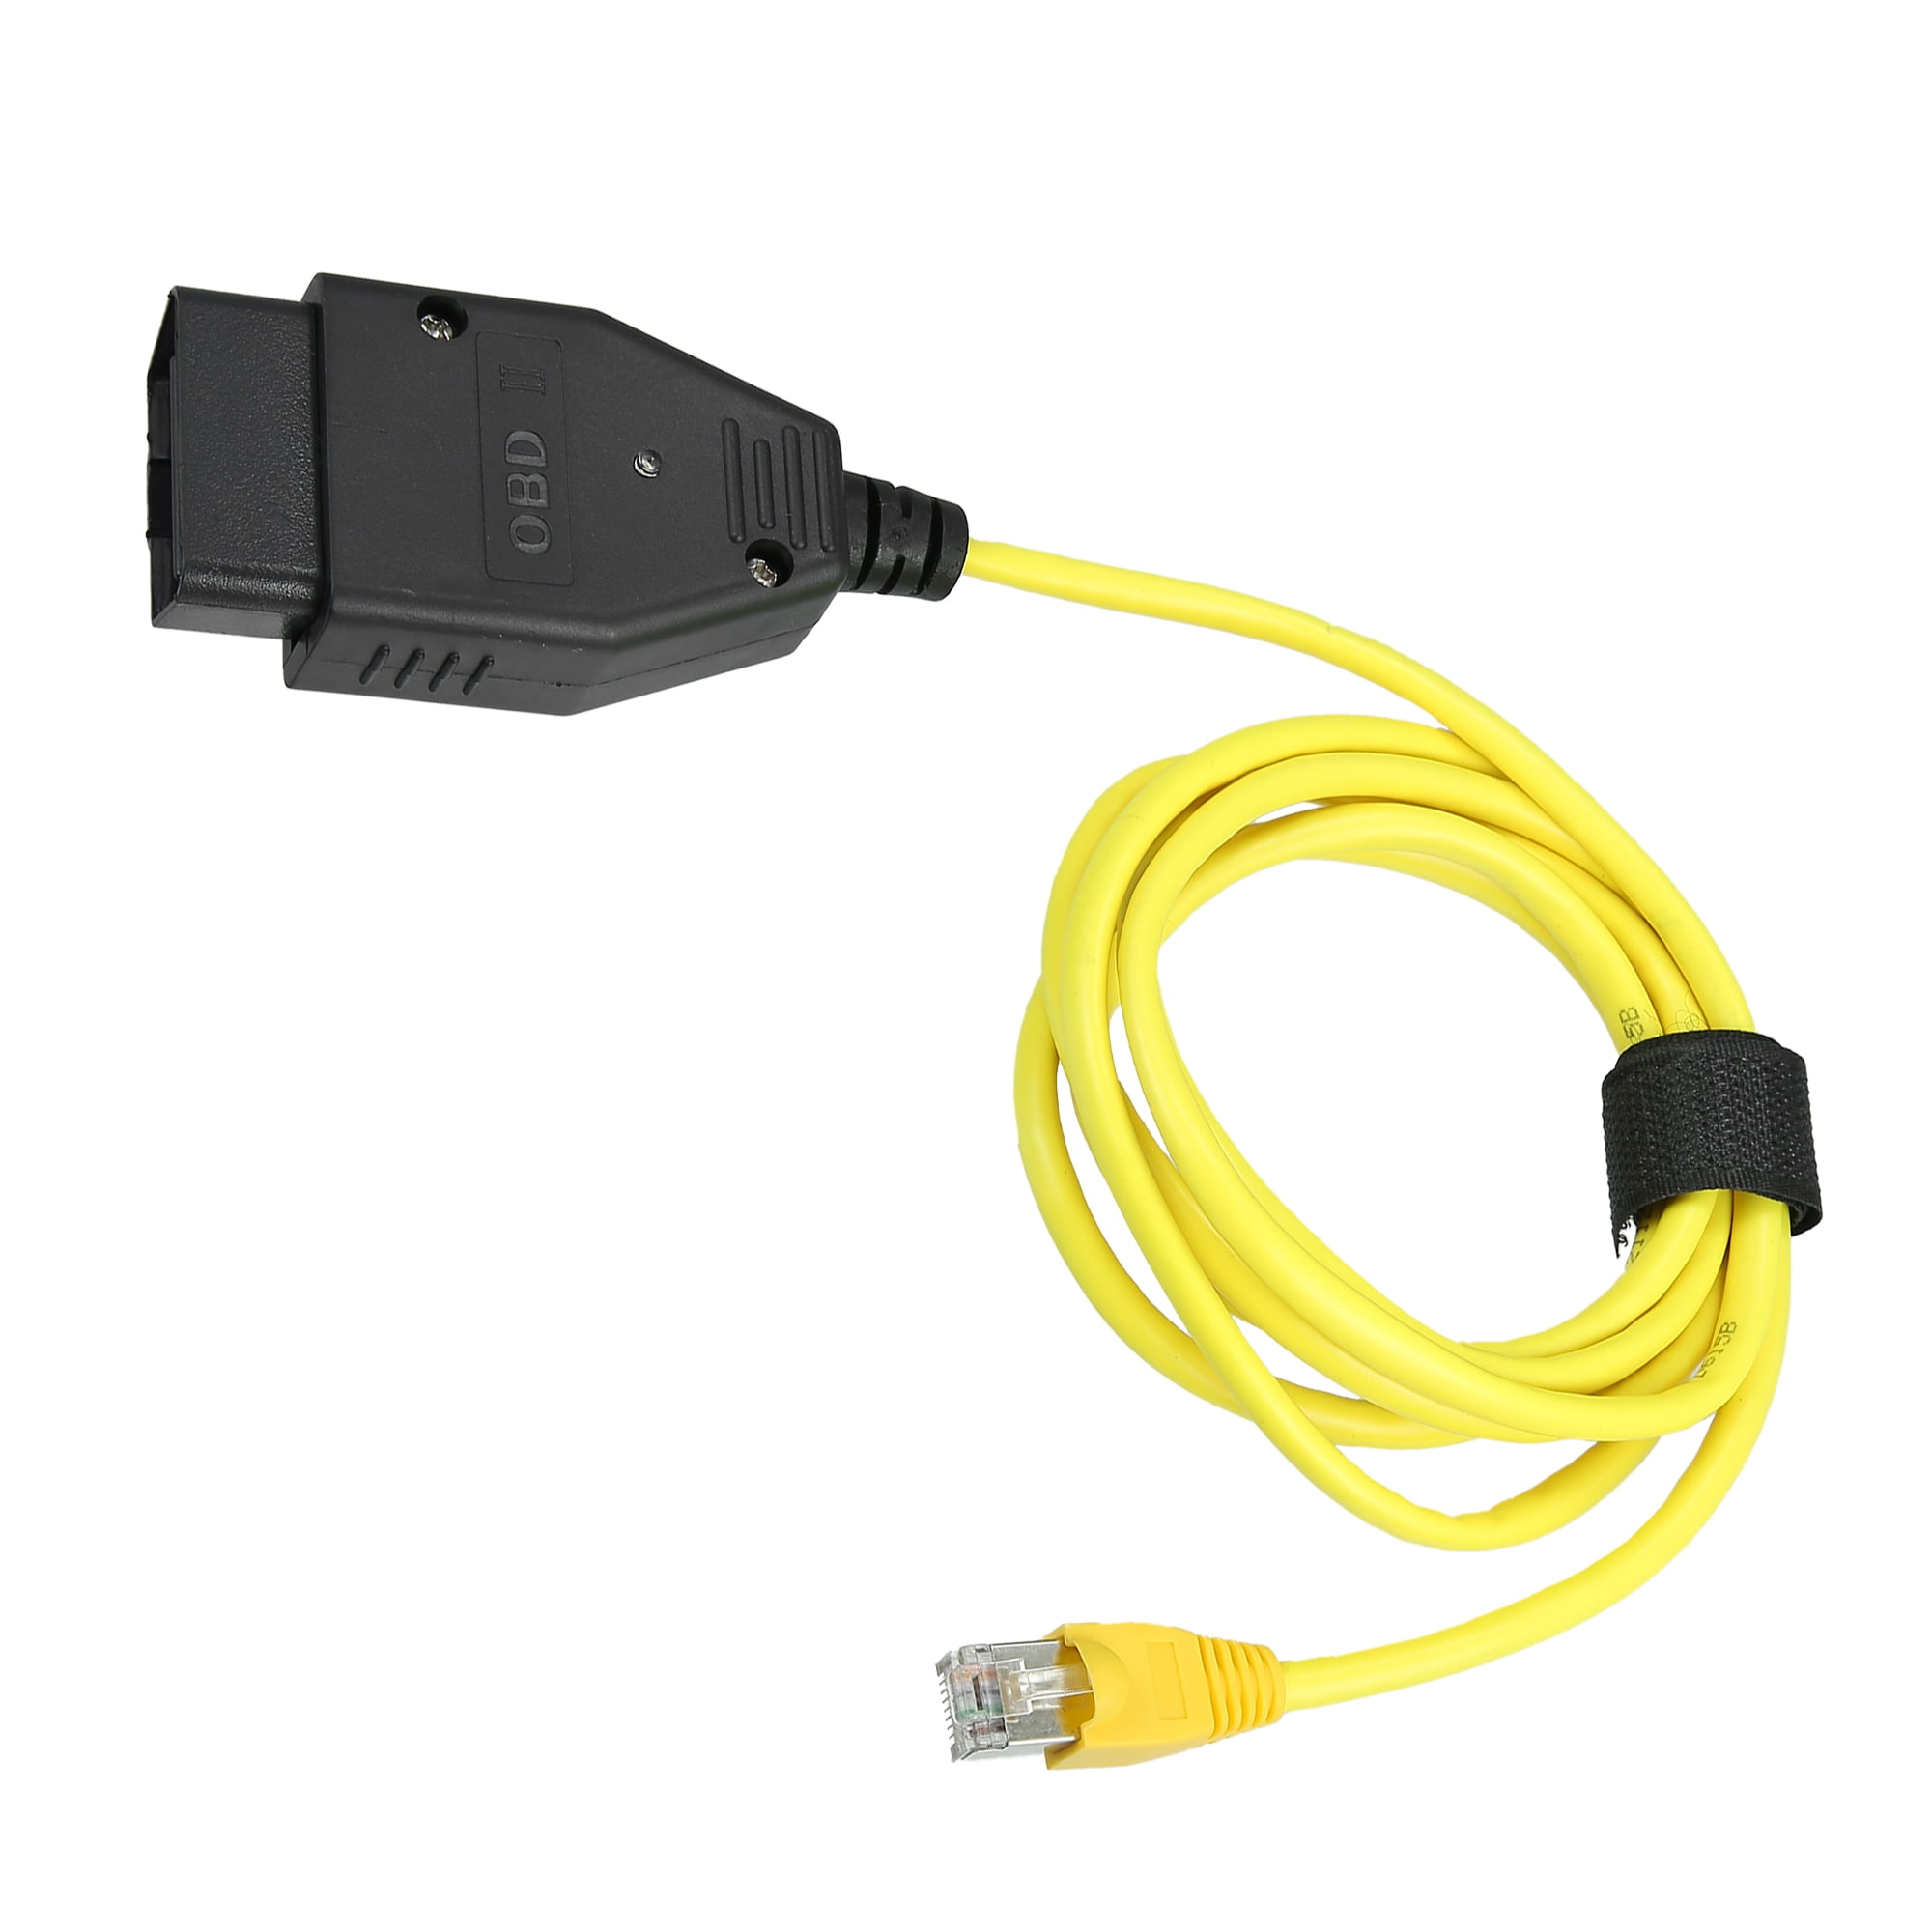 AuraTech Enet obd2 Cable ethernet Connector F seires Coding Cable obd2 to  rj45